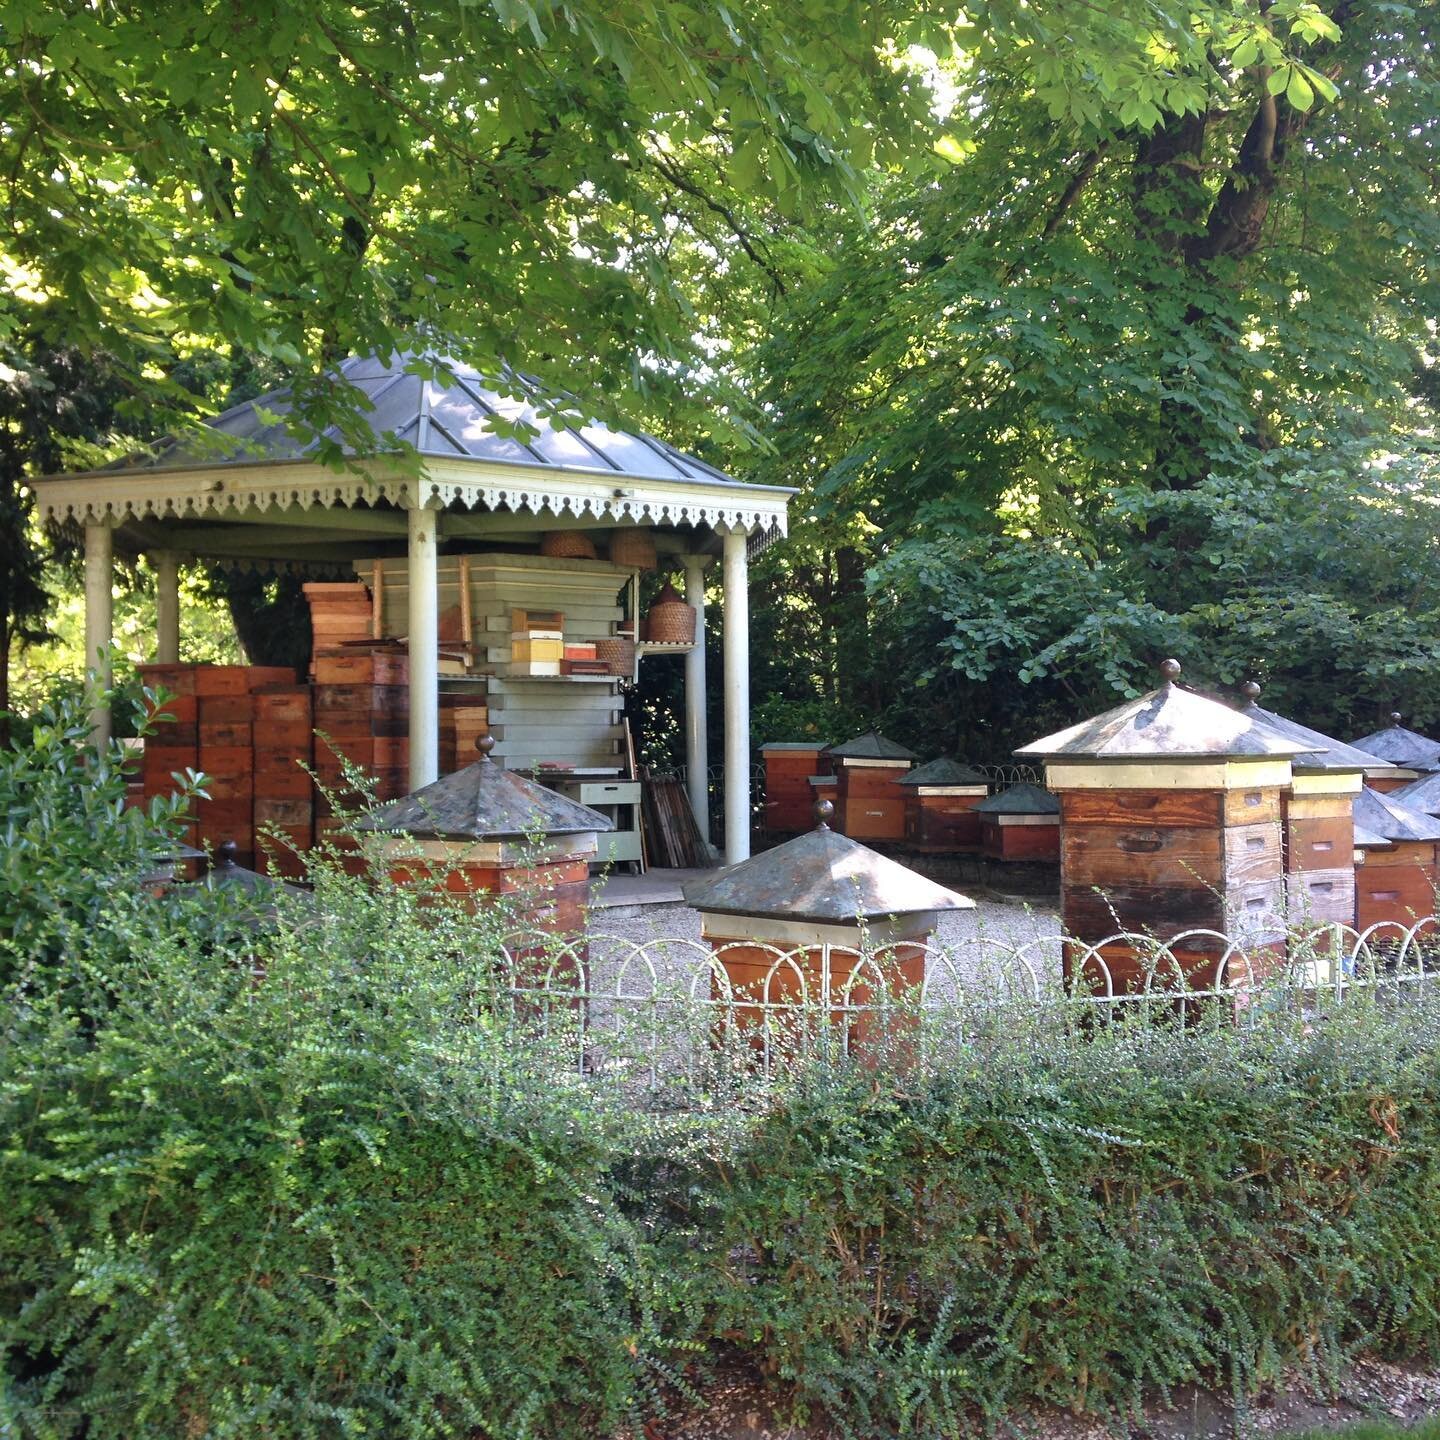 More Paris... the impressive apiary in Luxembourg Gardens is a little hidden from view, sited well away from paths and open public thoroughfares, perhaps for good reason as the honeybees were intense. Copper roofed frames, a charming pavilion stacked